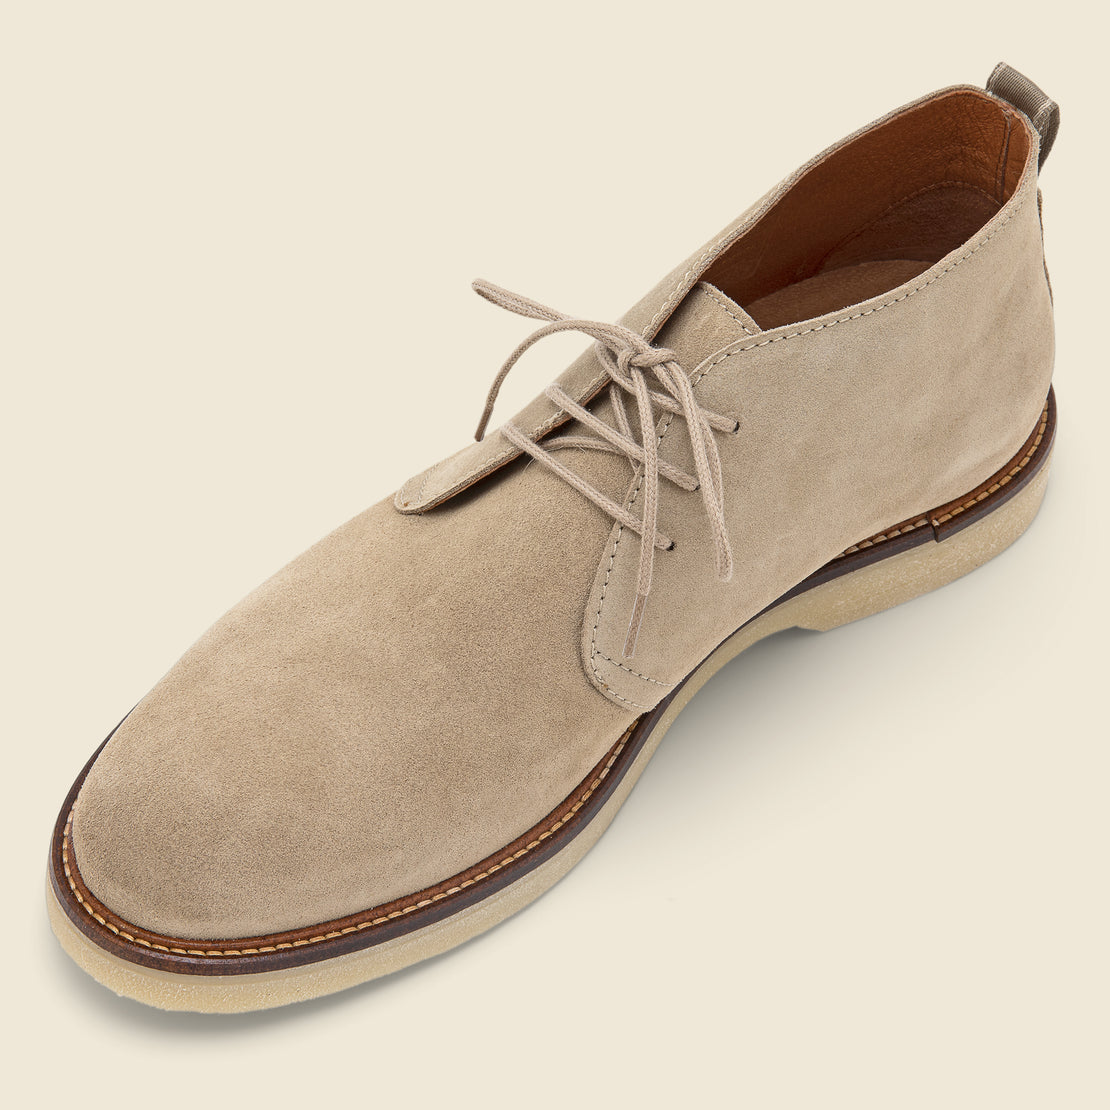 Kip Suede Chukka Boot - Sand - Shoe the Bear - STAG Provisions - Shoes - Boots / Chukkas